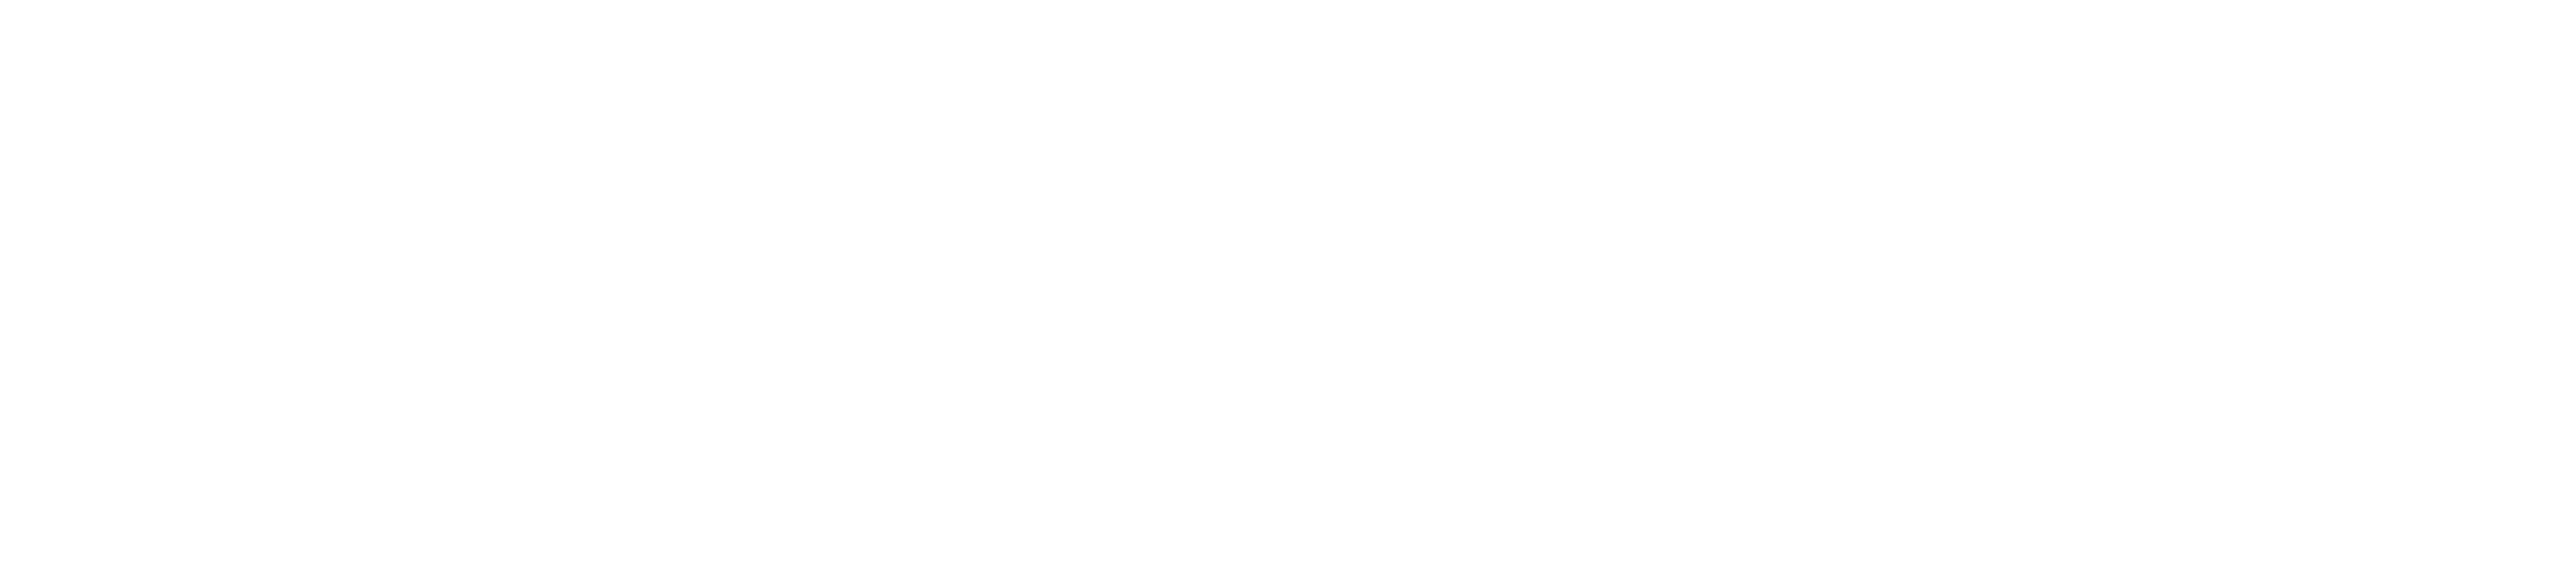 Information Advice & Support Services Network